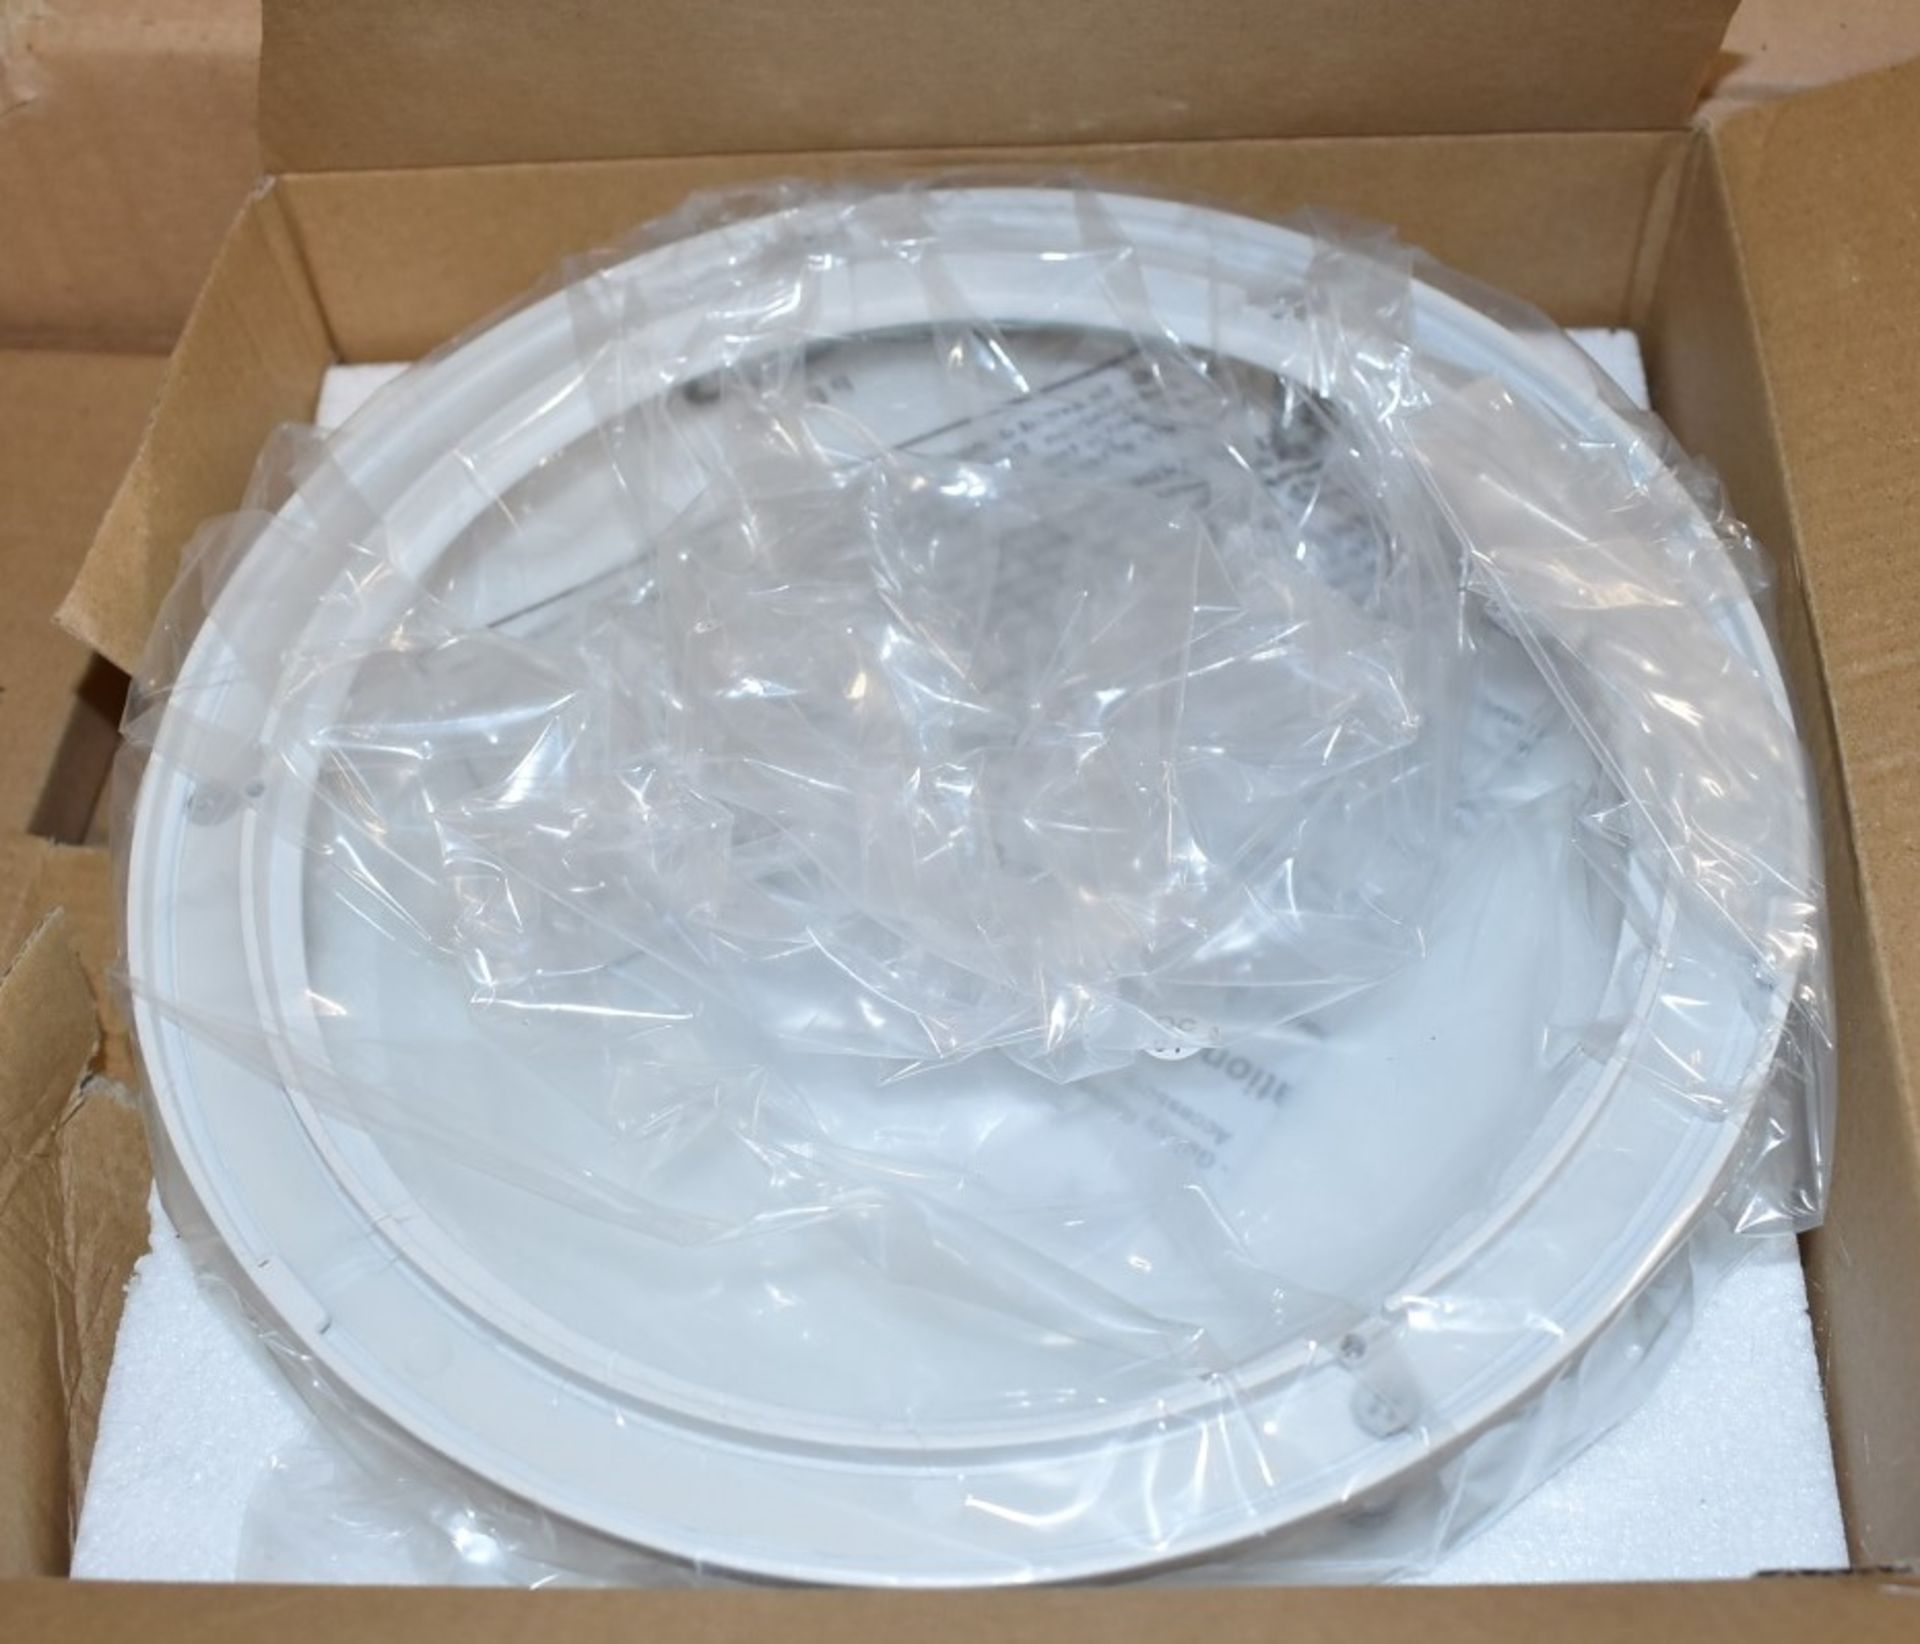 6 x Ansell Lighting AGPL/DG1/W Galaxy White Trim Bezels With Frosted Clear Glass For Downlights - Image 2 of 5